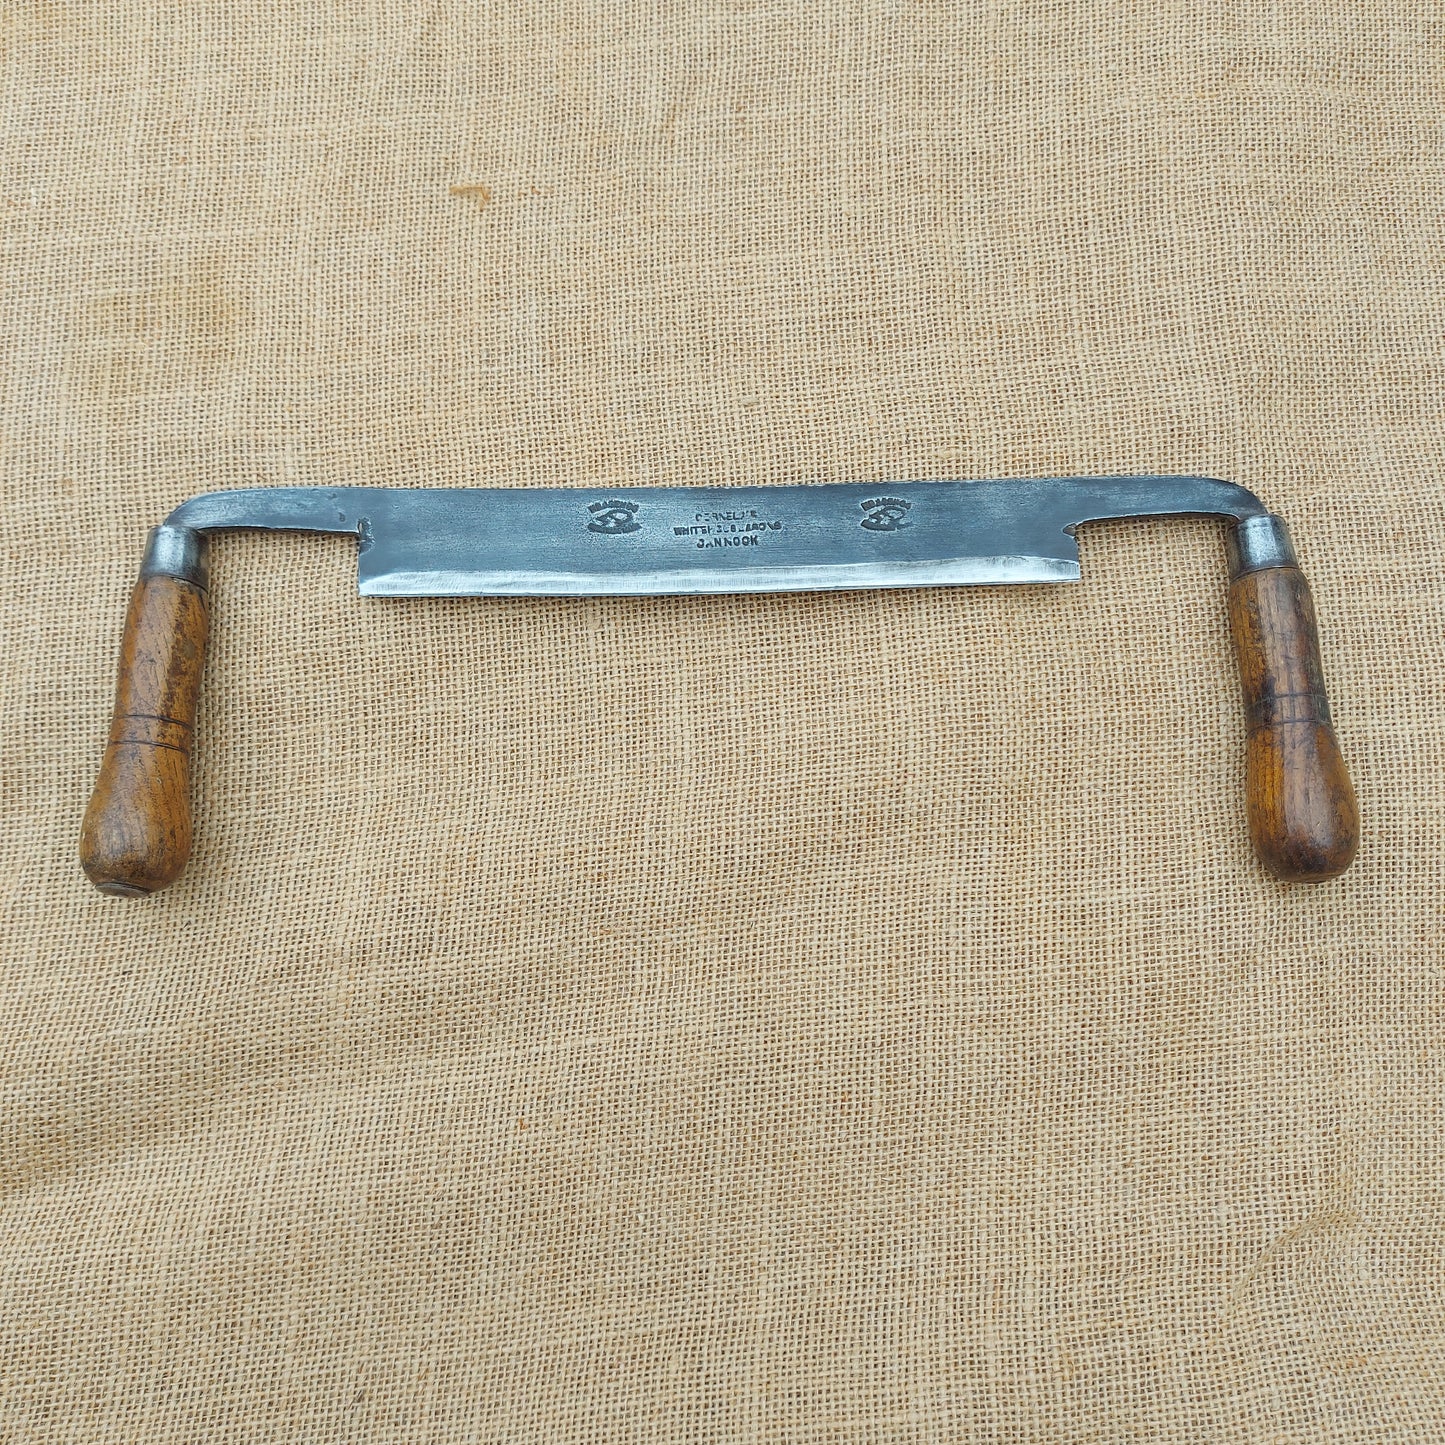 Vintage Drawknife by Whitehouse & Sons